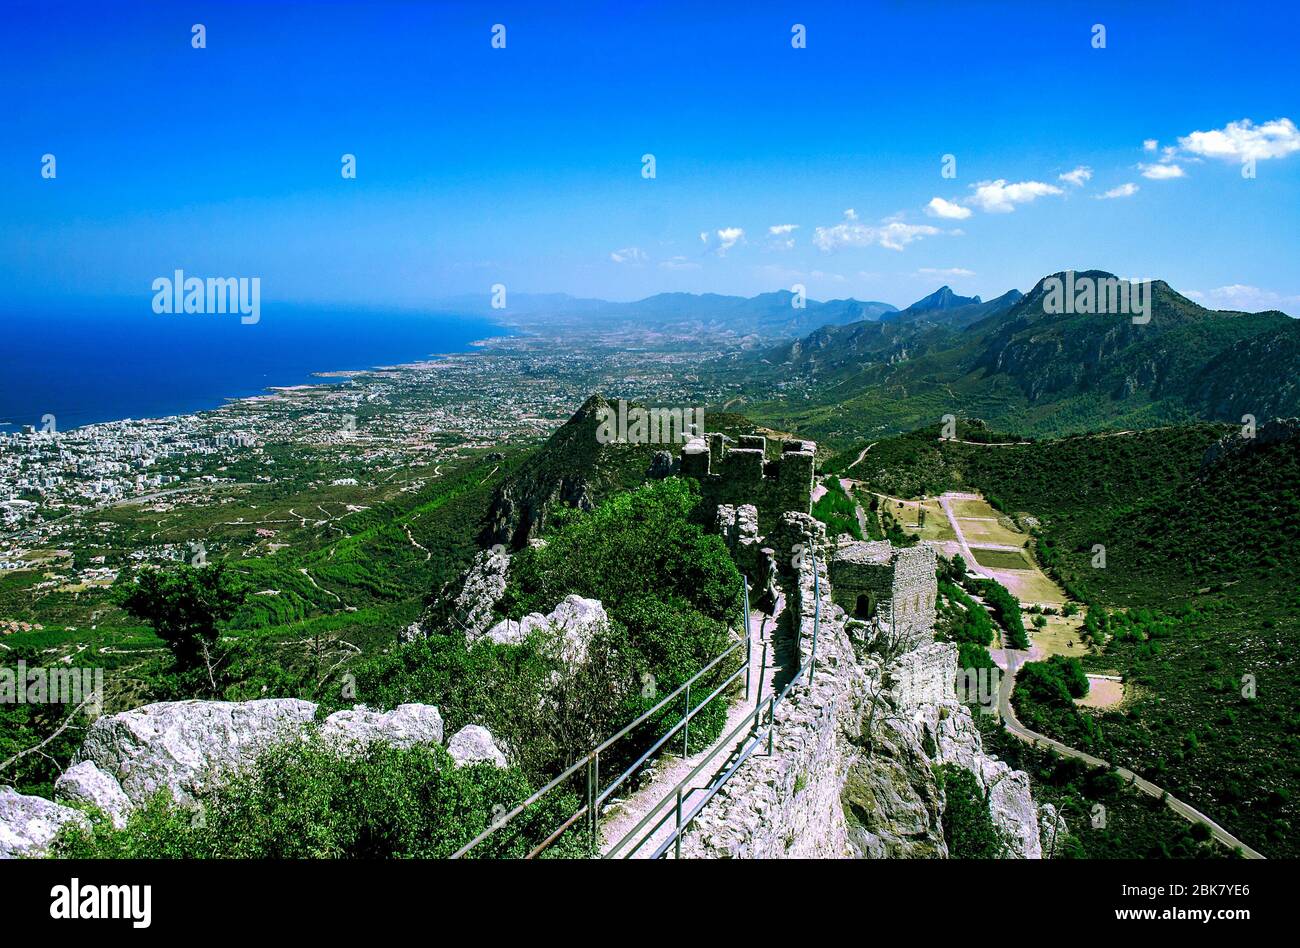 Landscape. View from the top of the mountain to the coastline of North Cyprus and the wall of the Castle of St. Hilarion. Cyprus, the castle of St. Hi Stock Photo